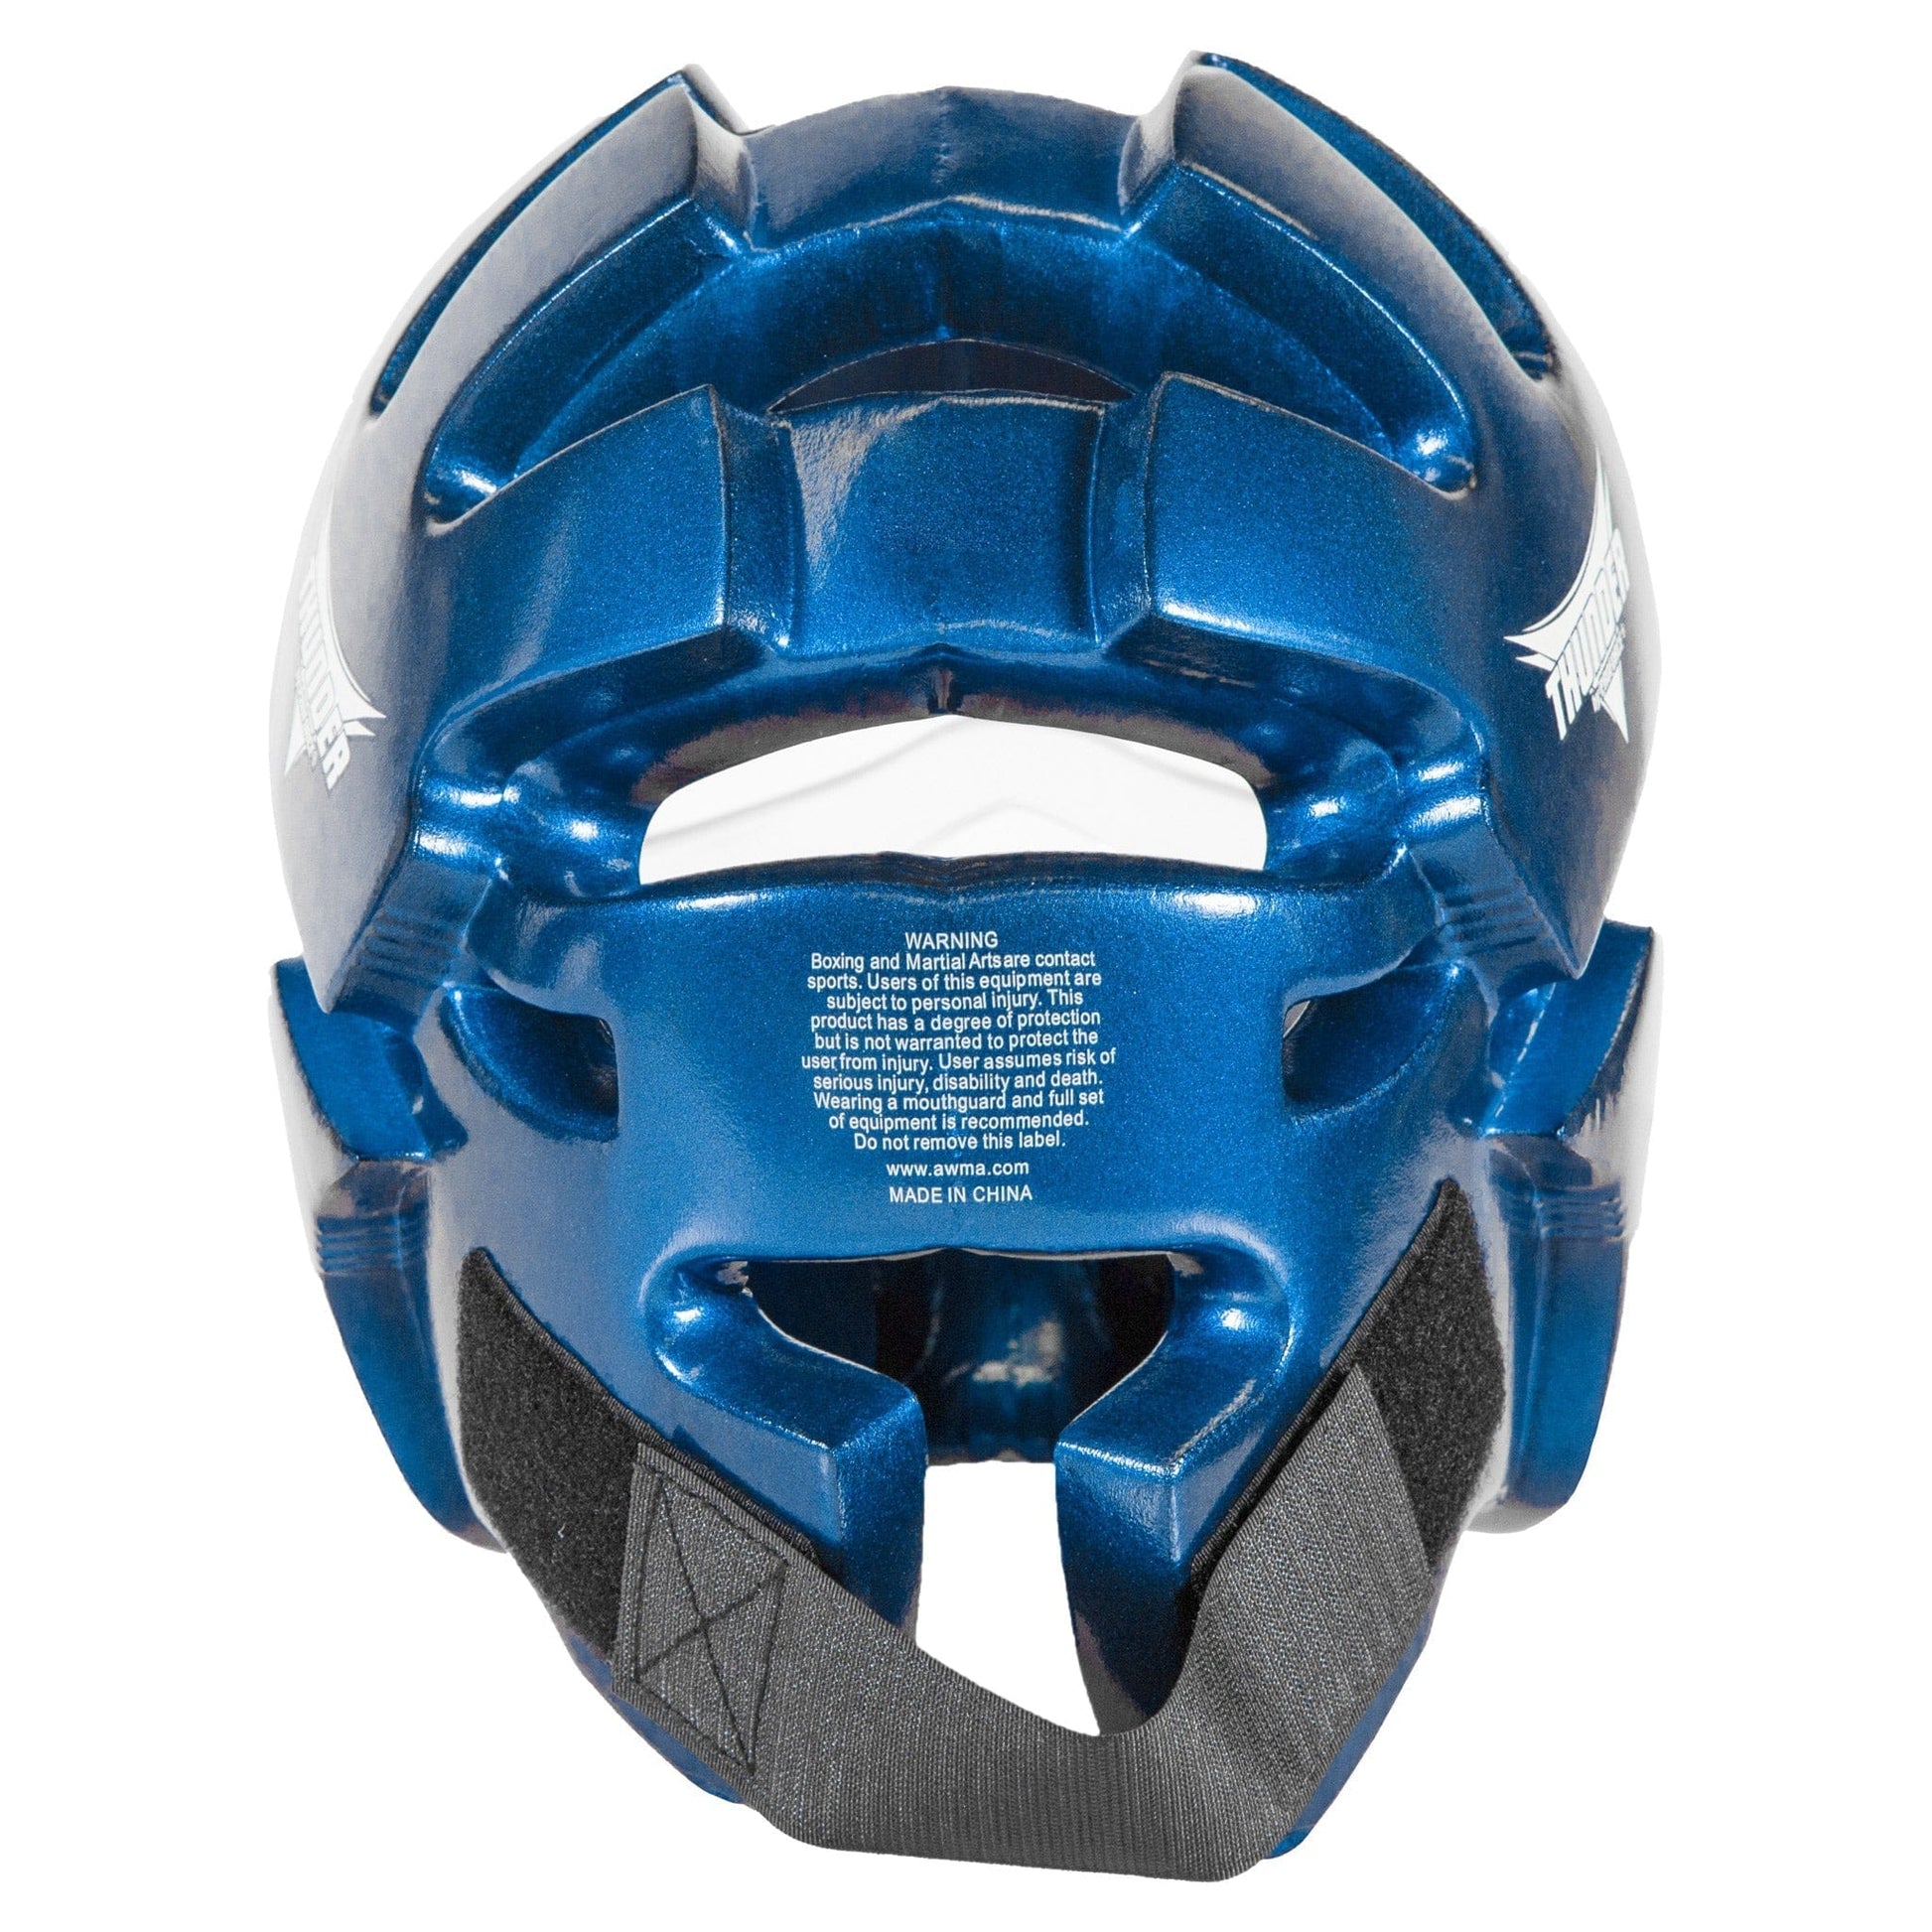 ProForce Sparring Gear ProForce Lighting 5 Piece Sparring Gear Combo Set BLUE with Full head and face mask